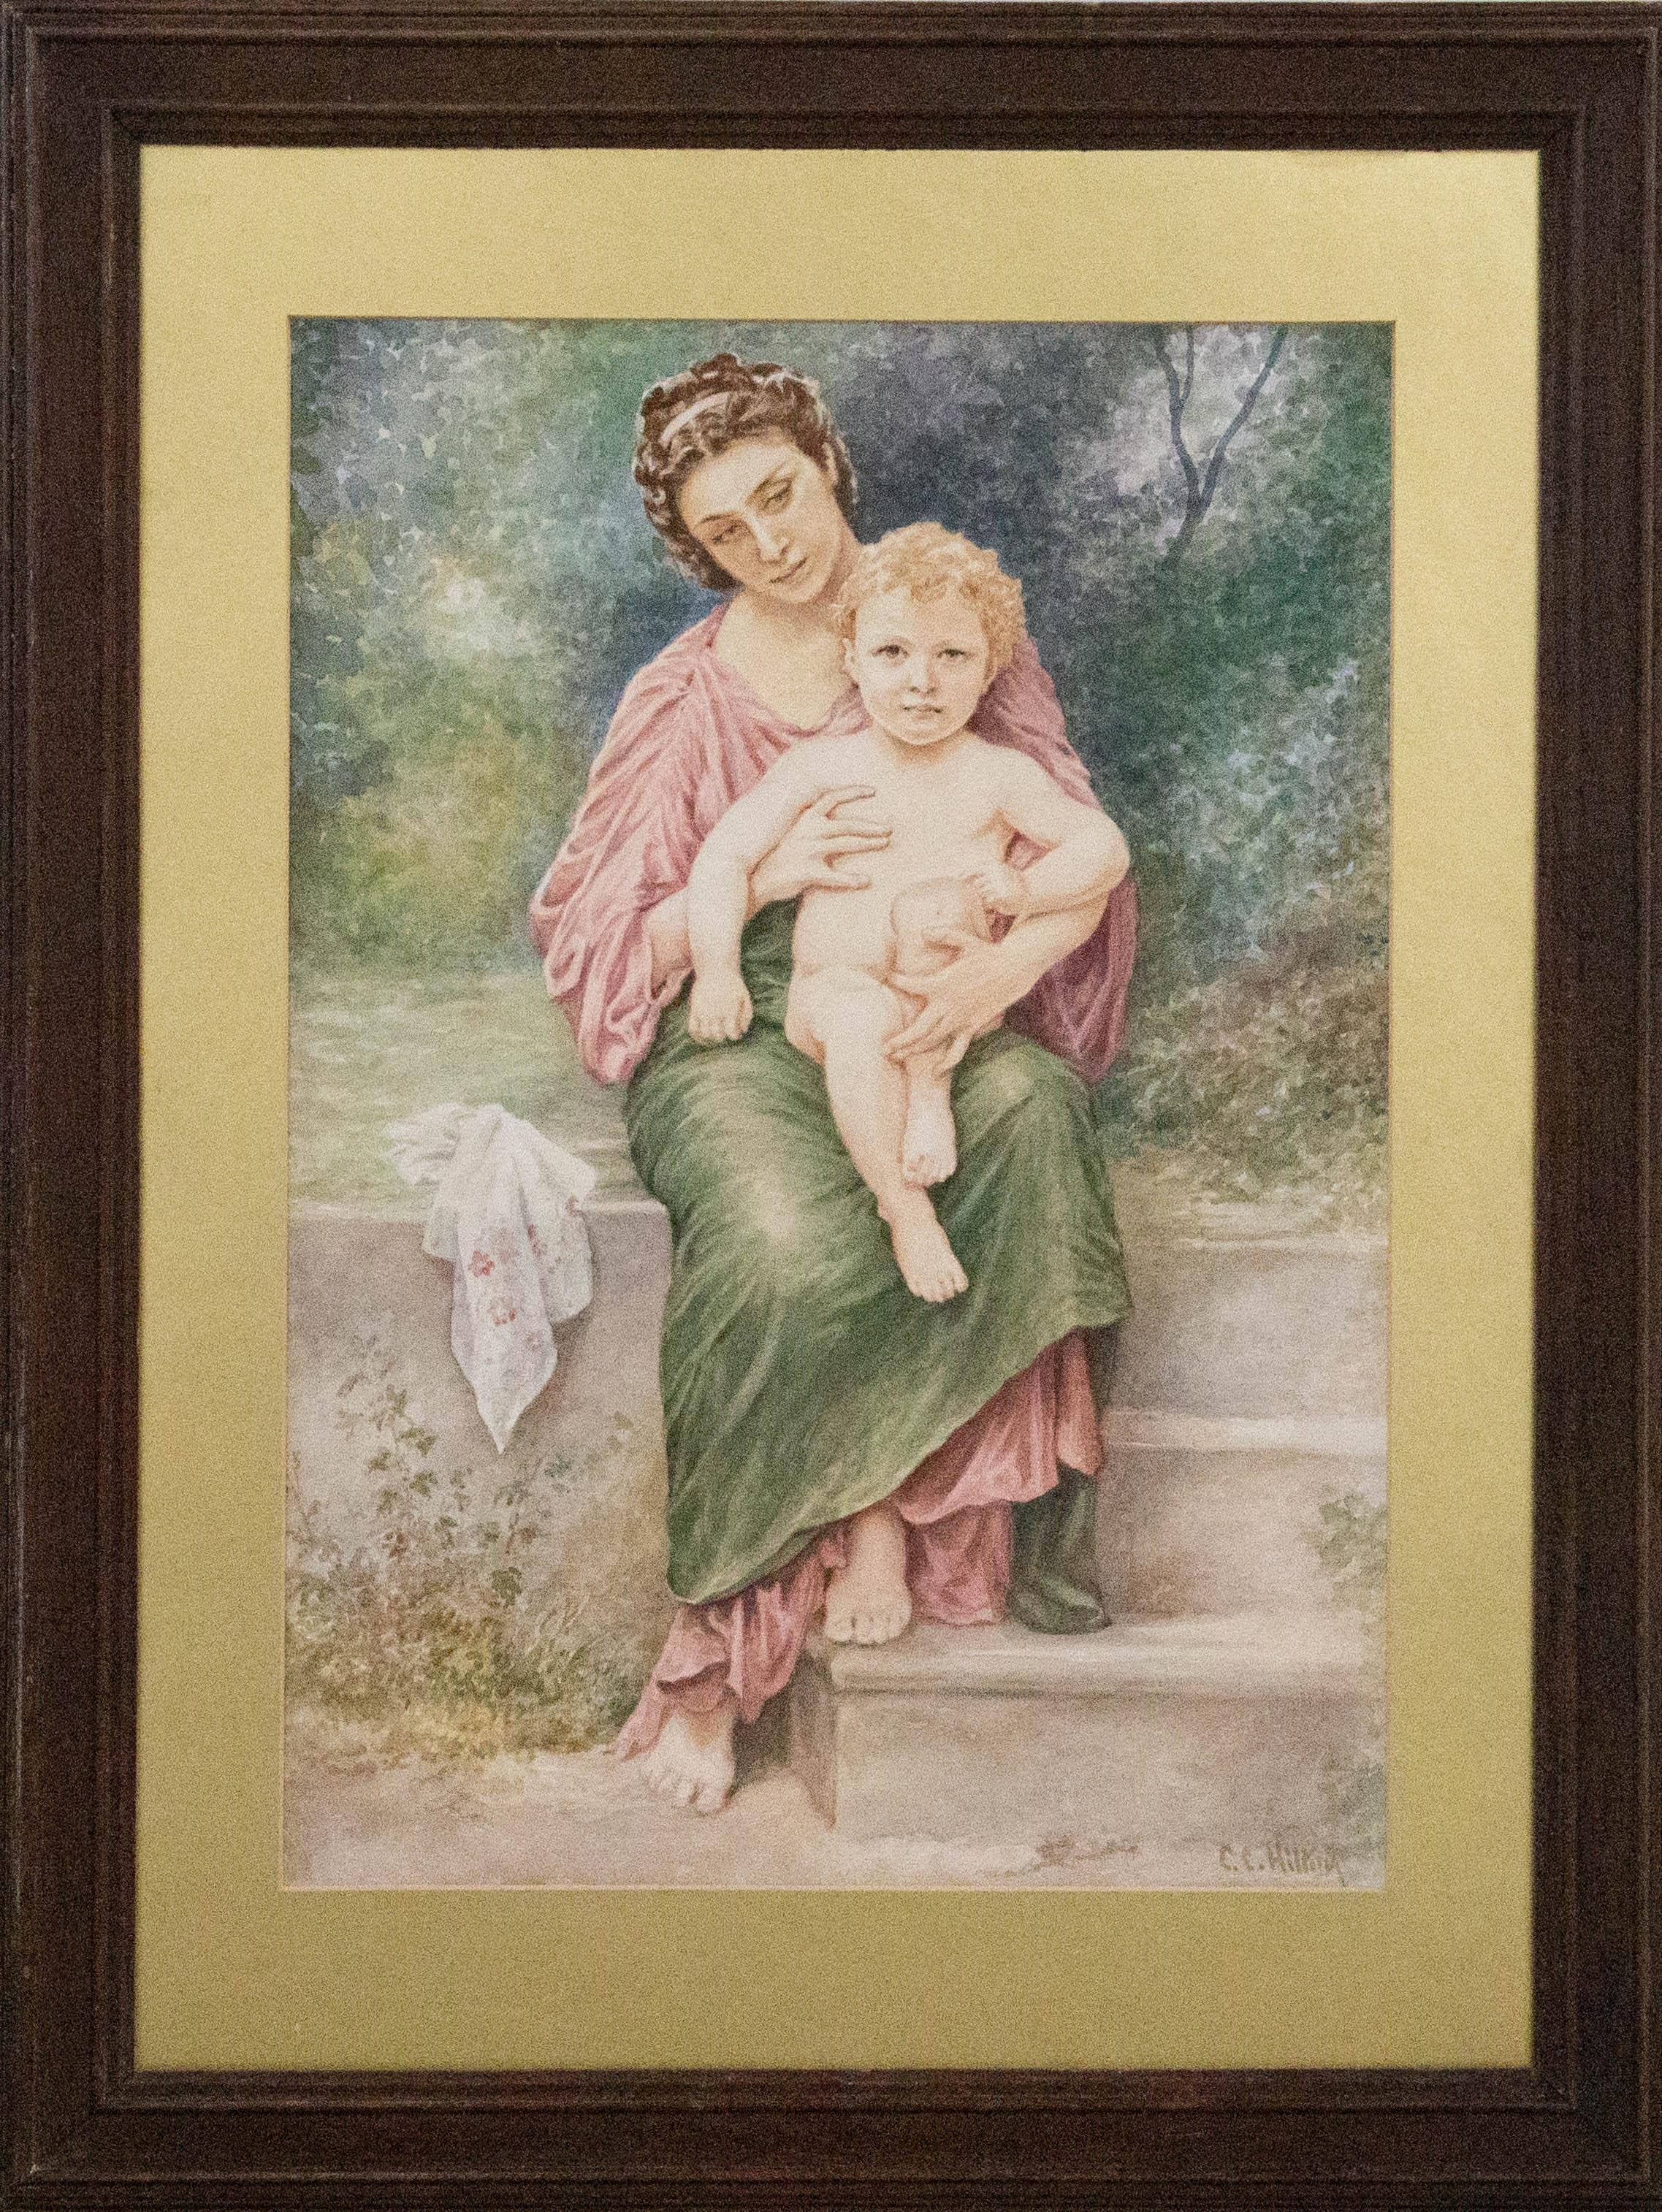 A beautiful early 20th Century (c. 1930-40) watercolour of impressive size. The scene shows a beautiful mother with dark hair in a Pre-Raphaelite style dress in pink and green, holding her young child on her lap. The mother has a far off, dreamy